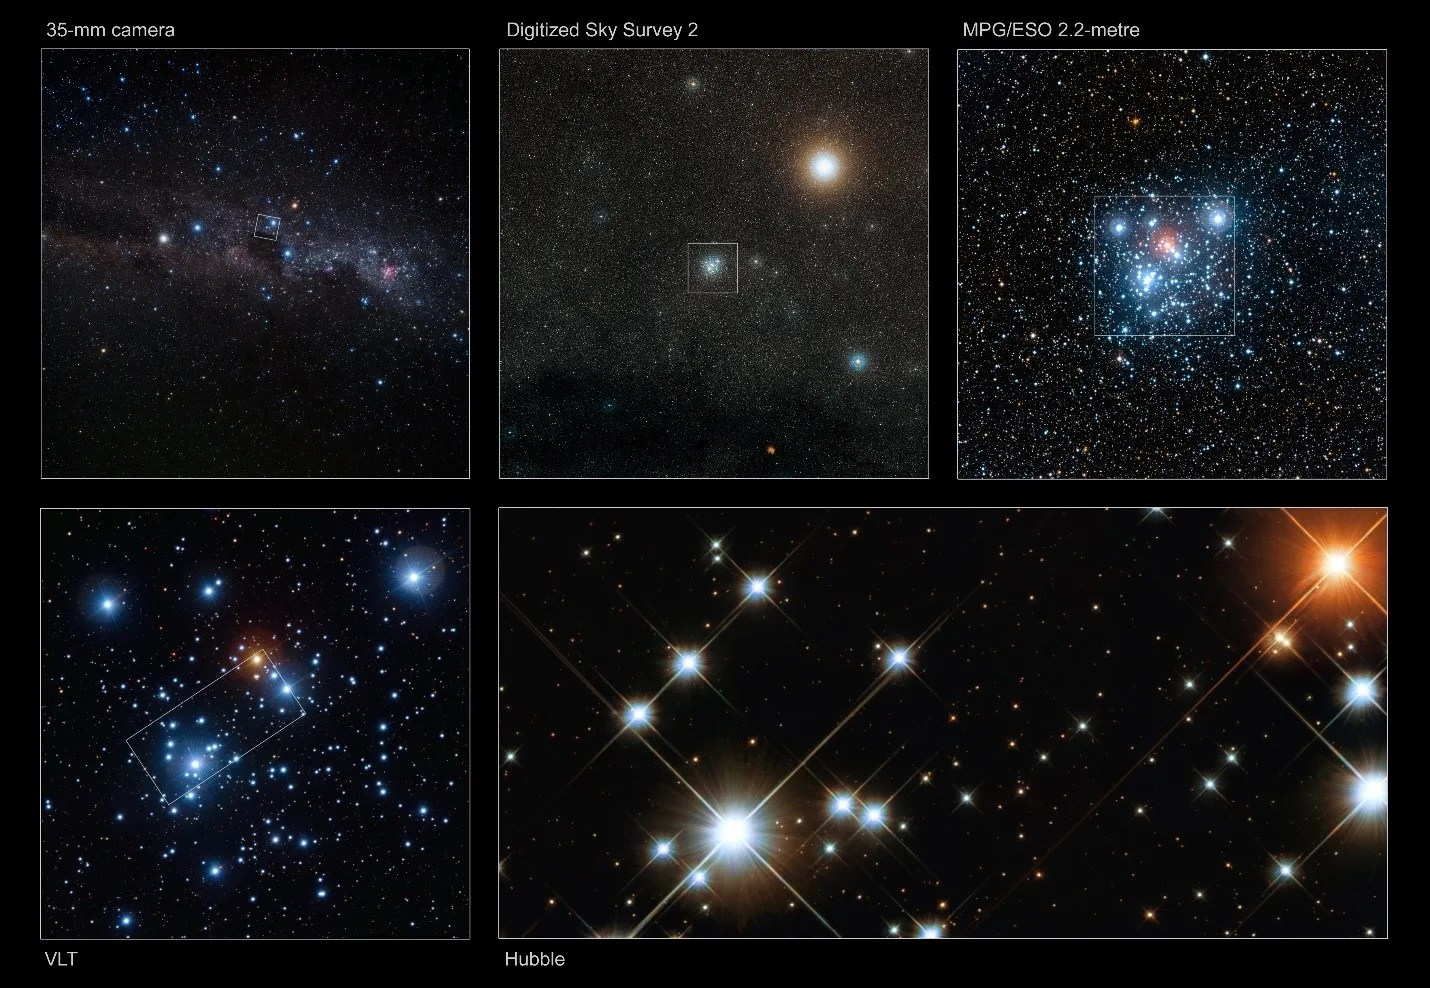 A series of 5 images in blocks that "zoom in" until they end in the Hubble image of Caldwell 94. They start with an image of distant gas, dust and stars and each exhibits progressively more detail until the Hubble image displays large, individual white and reddish stars.